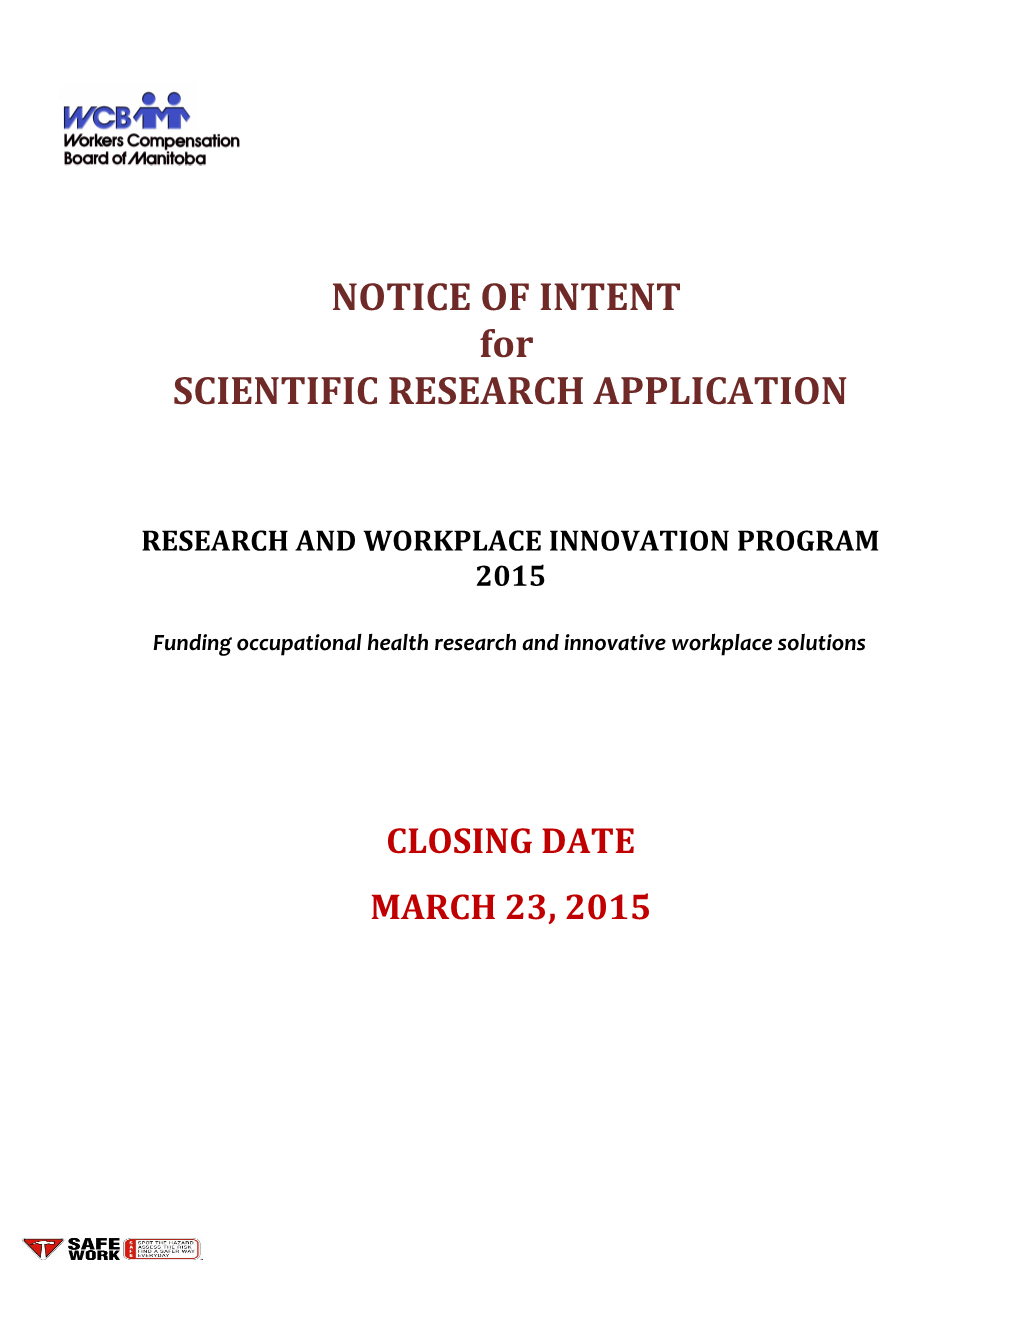 Research and Workplace Innovation Program